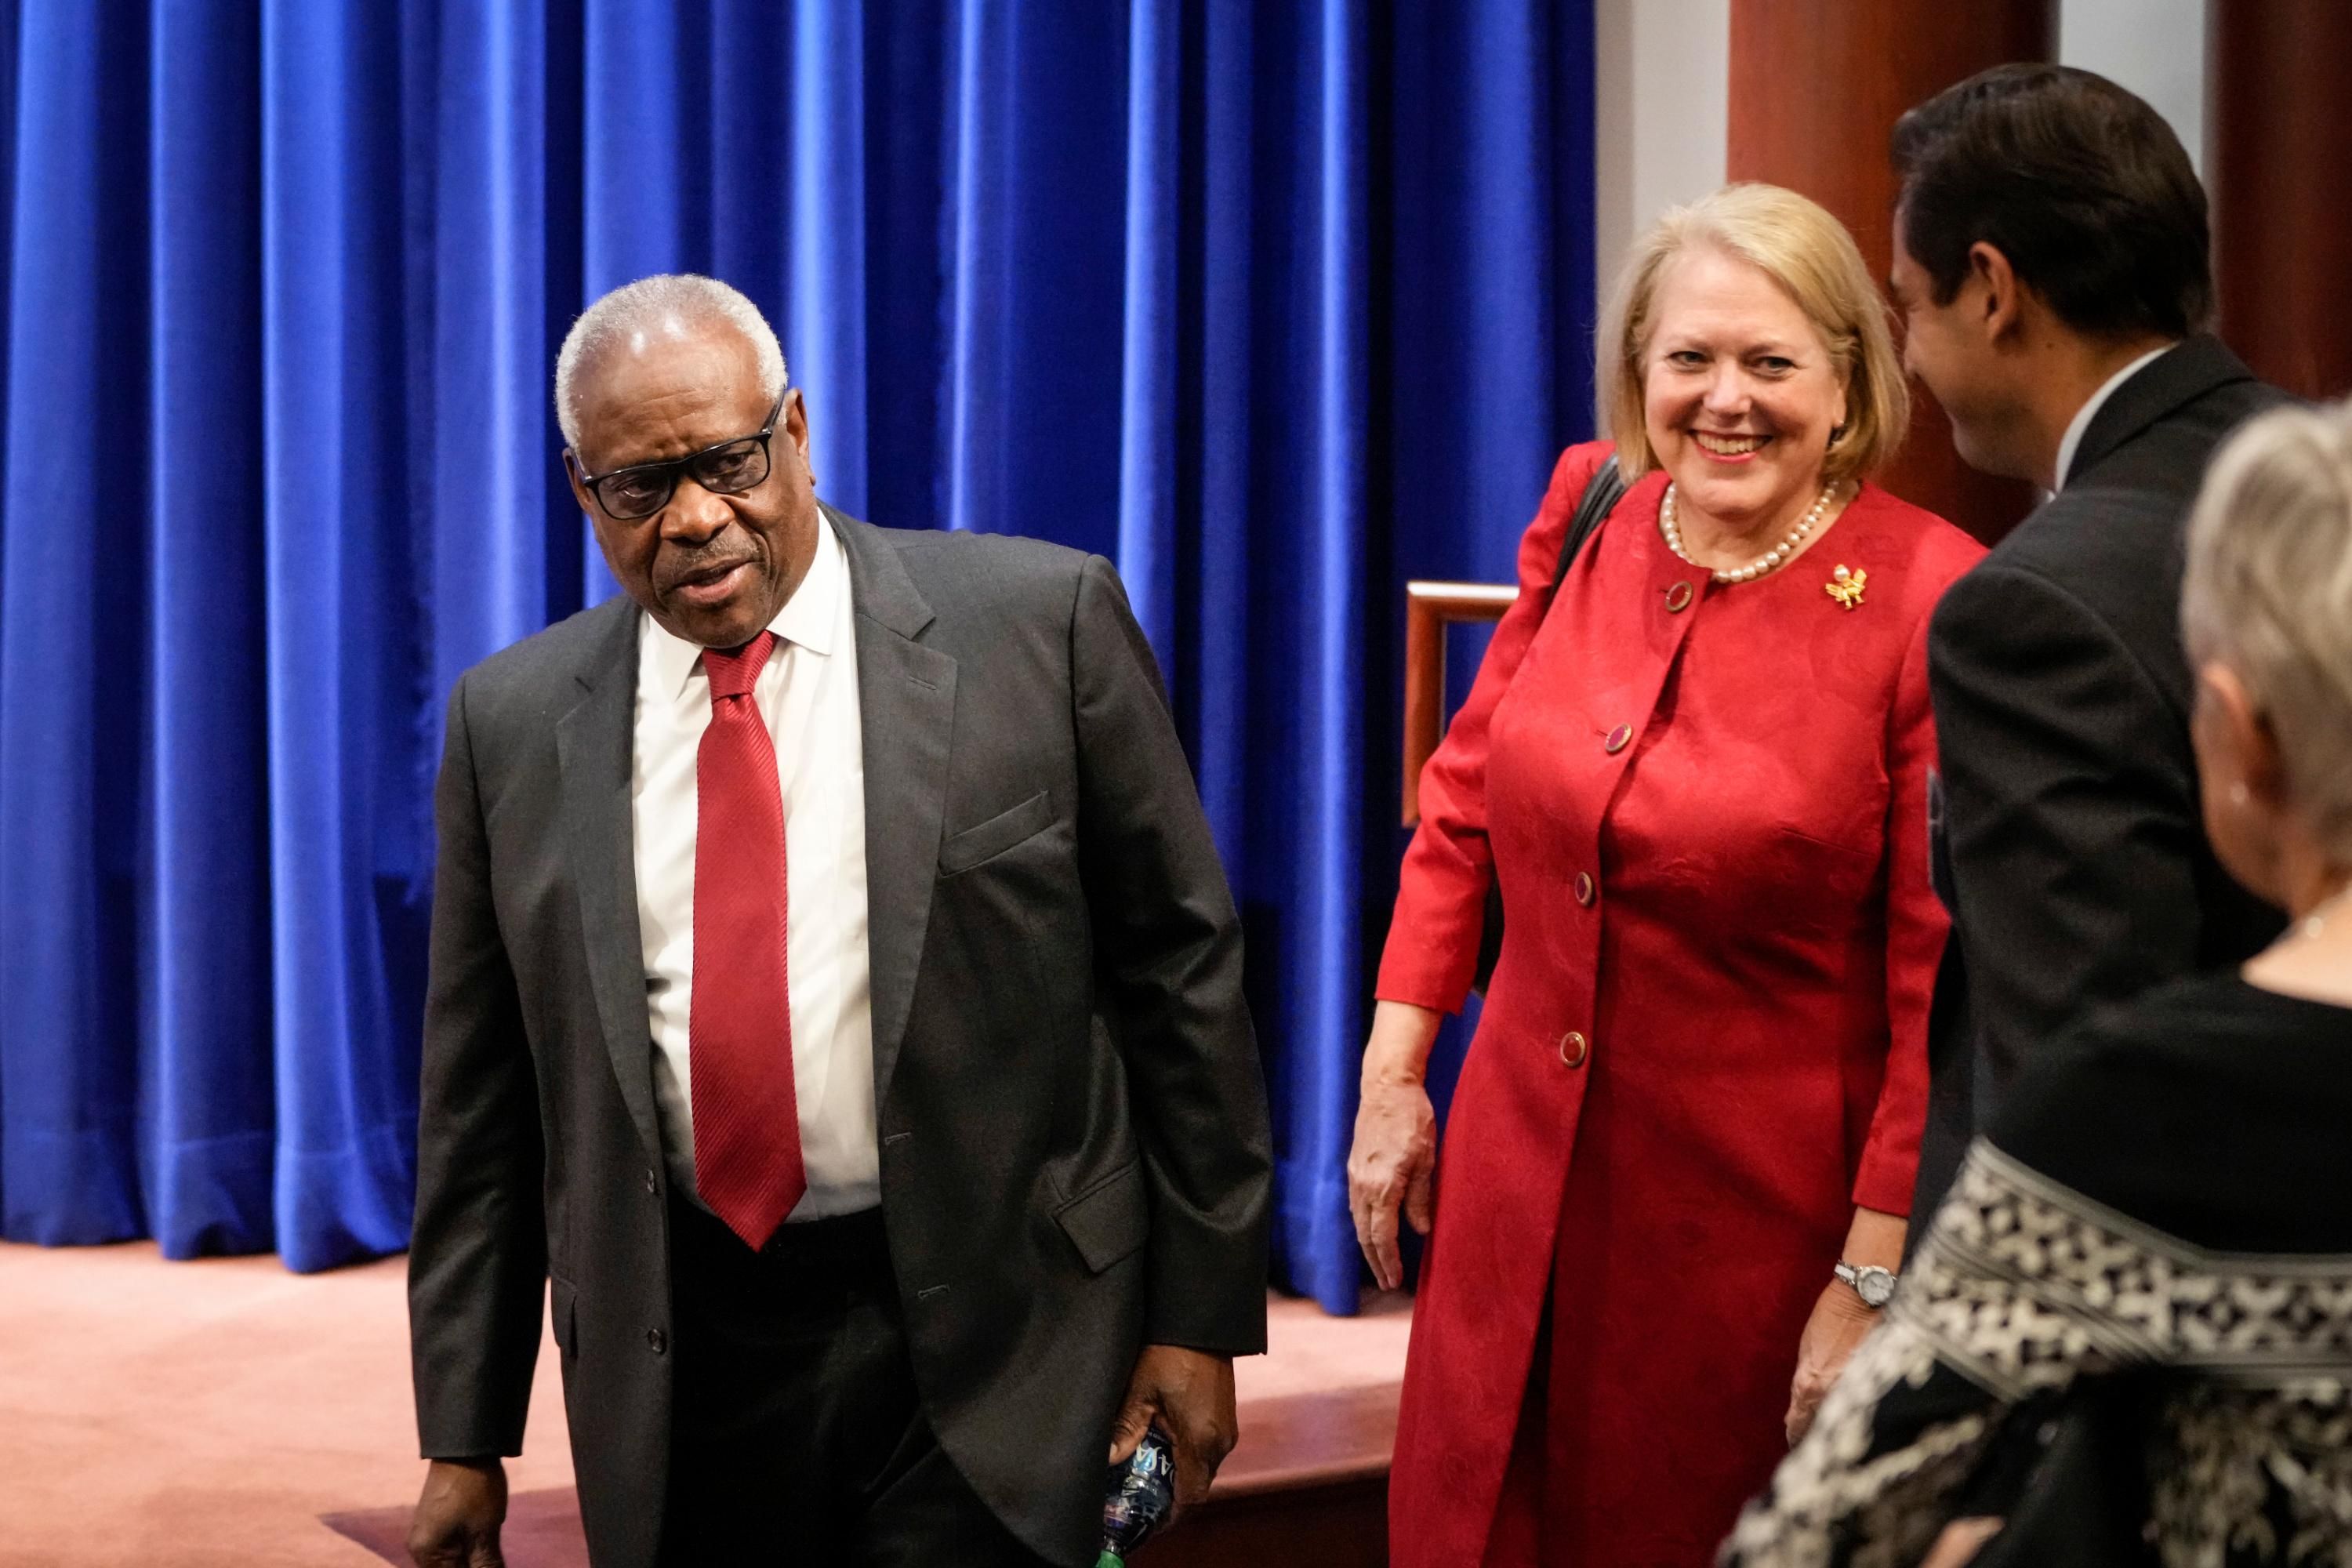 Supreme Court Justice Clarence Thomas arrives at an event with his wife Ginni Thomas